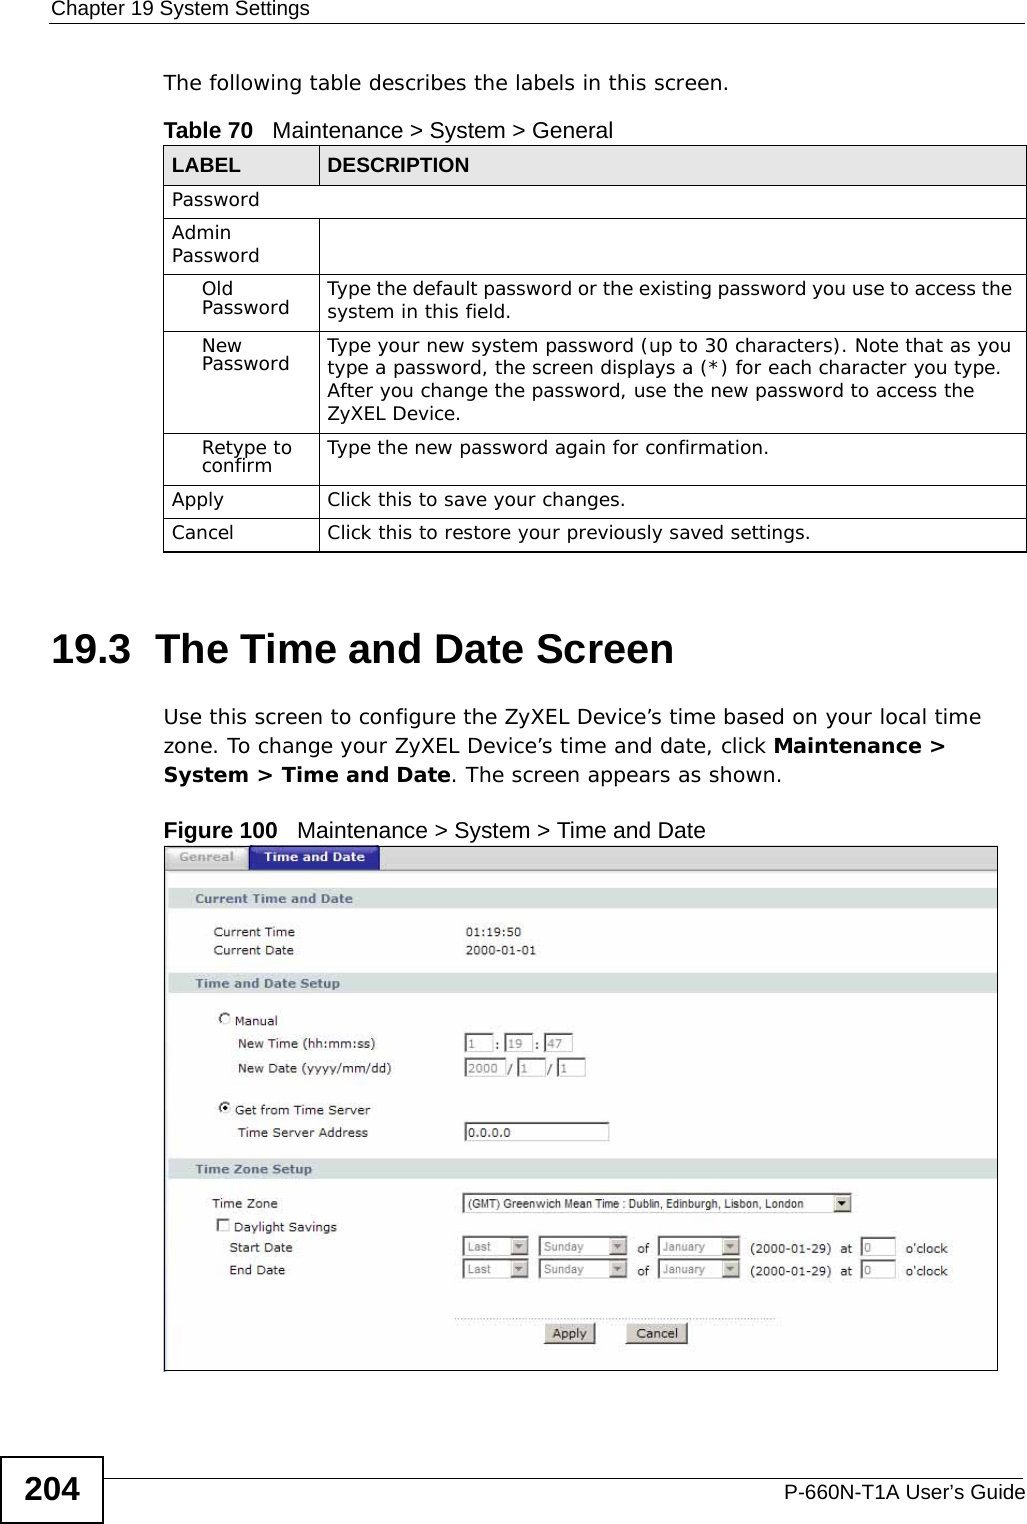 Chapter 19 System SettingsP-660N-T1A User’s Guide204The following table describes the labels in this screen. 19.3  The Time and Date Screen Use this screen to configure the ZyXEL Device’s time based on your local time zone. To change your ZyXEL Device’s time and date, click Maintenance &gt; System &gt; Time and Date. The screen appears as shown.Figure 100   Maintenance &gt; System &gt; Time and DateTable 70   Maintenance &gt; System &gt; GeneralLABEL DESCRIPTIONPasswordAdmin PasswordOld Password Type the default password or the existing password you use to access the system in this field.New Password Type your new system password (up to 30 characters). Note that as you type a password, the screen displays a (*) for each character you type. After you change the password, use the new password to access the ZyXEL Device.Retype to confirm Type the new password again for confirmation.Apply Click this to save your changes.Cancel Click this to restore your previously saved settings.